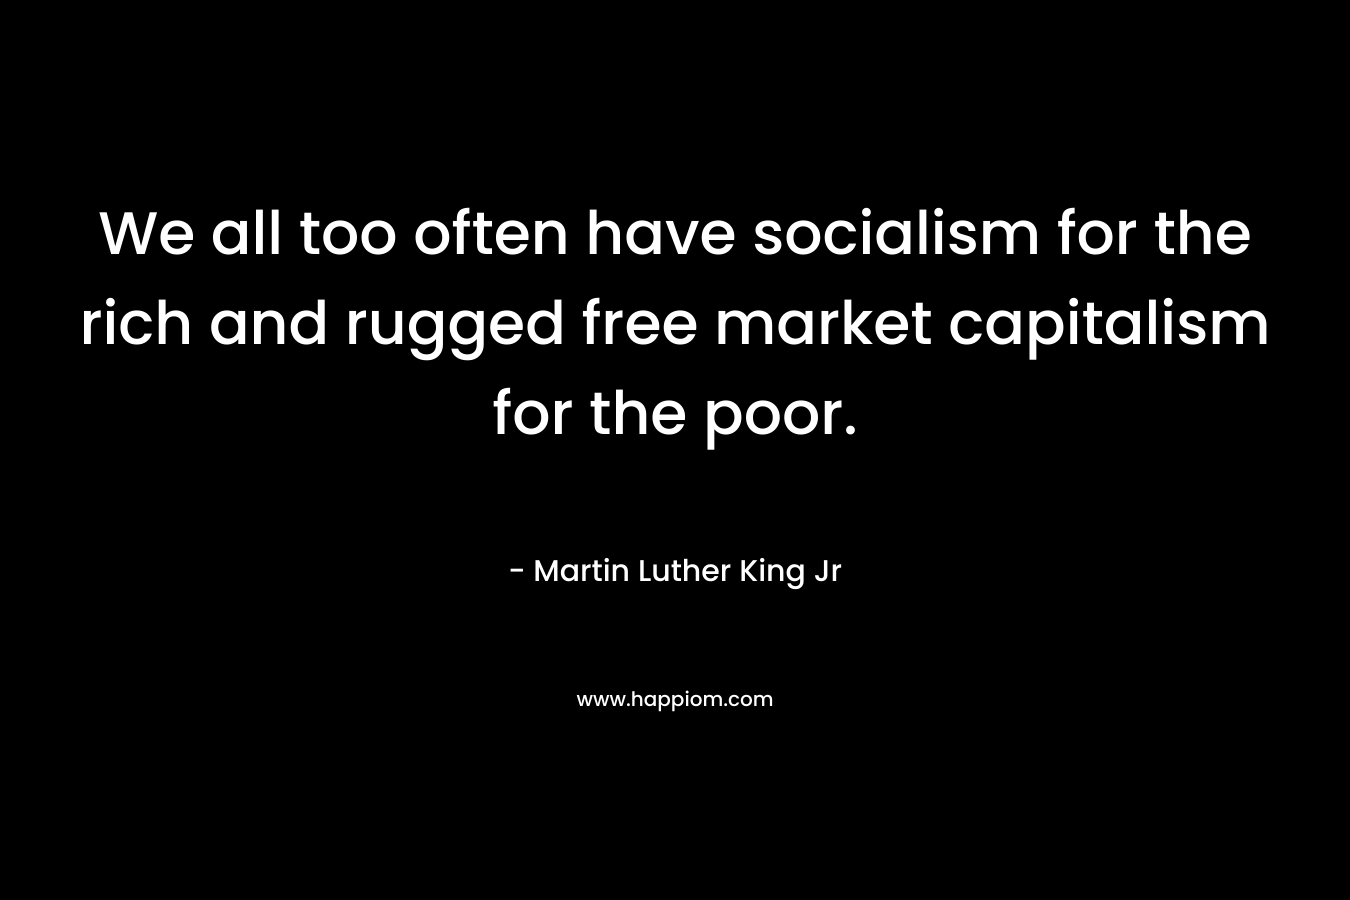 We all too often have socialism for the rich and rugged free market capitalism for the poor.